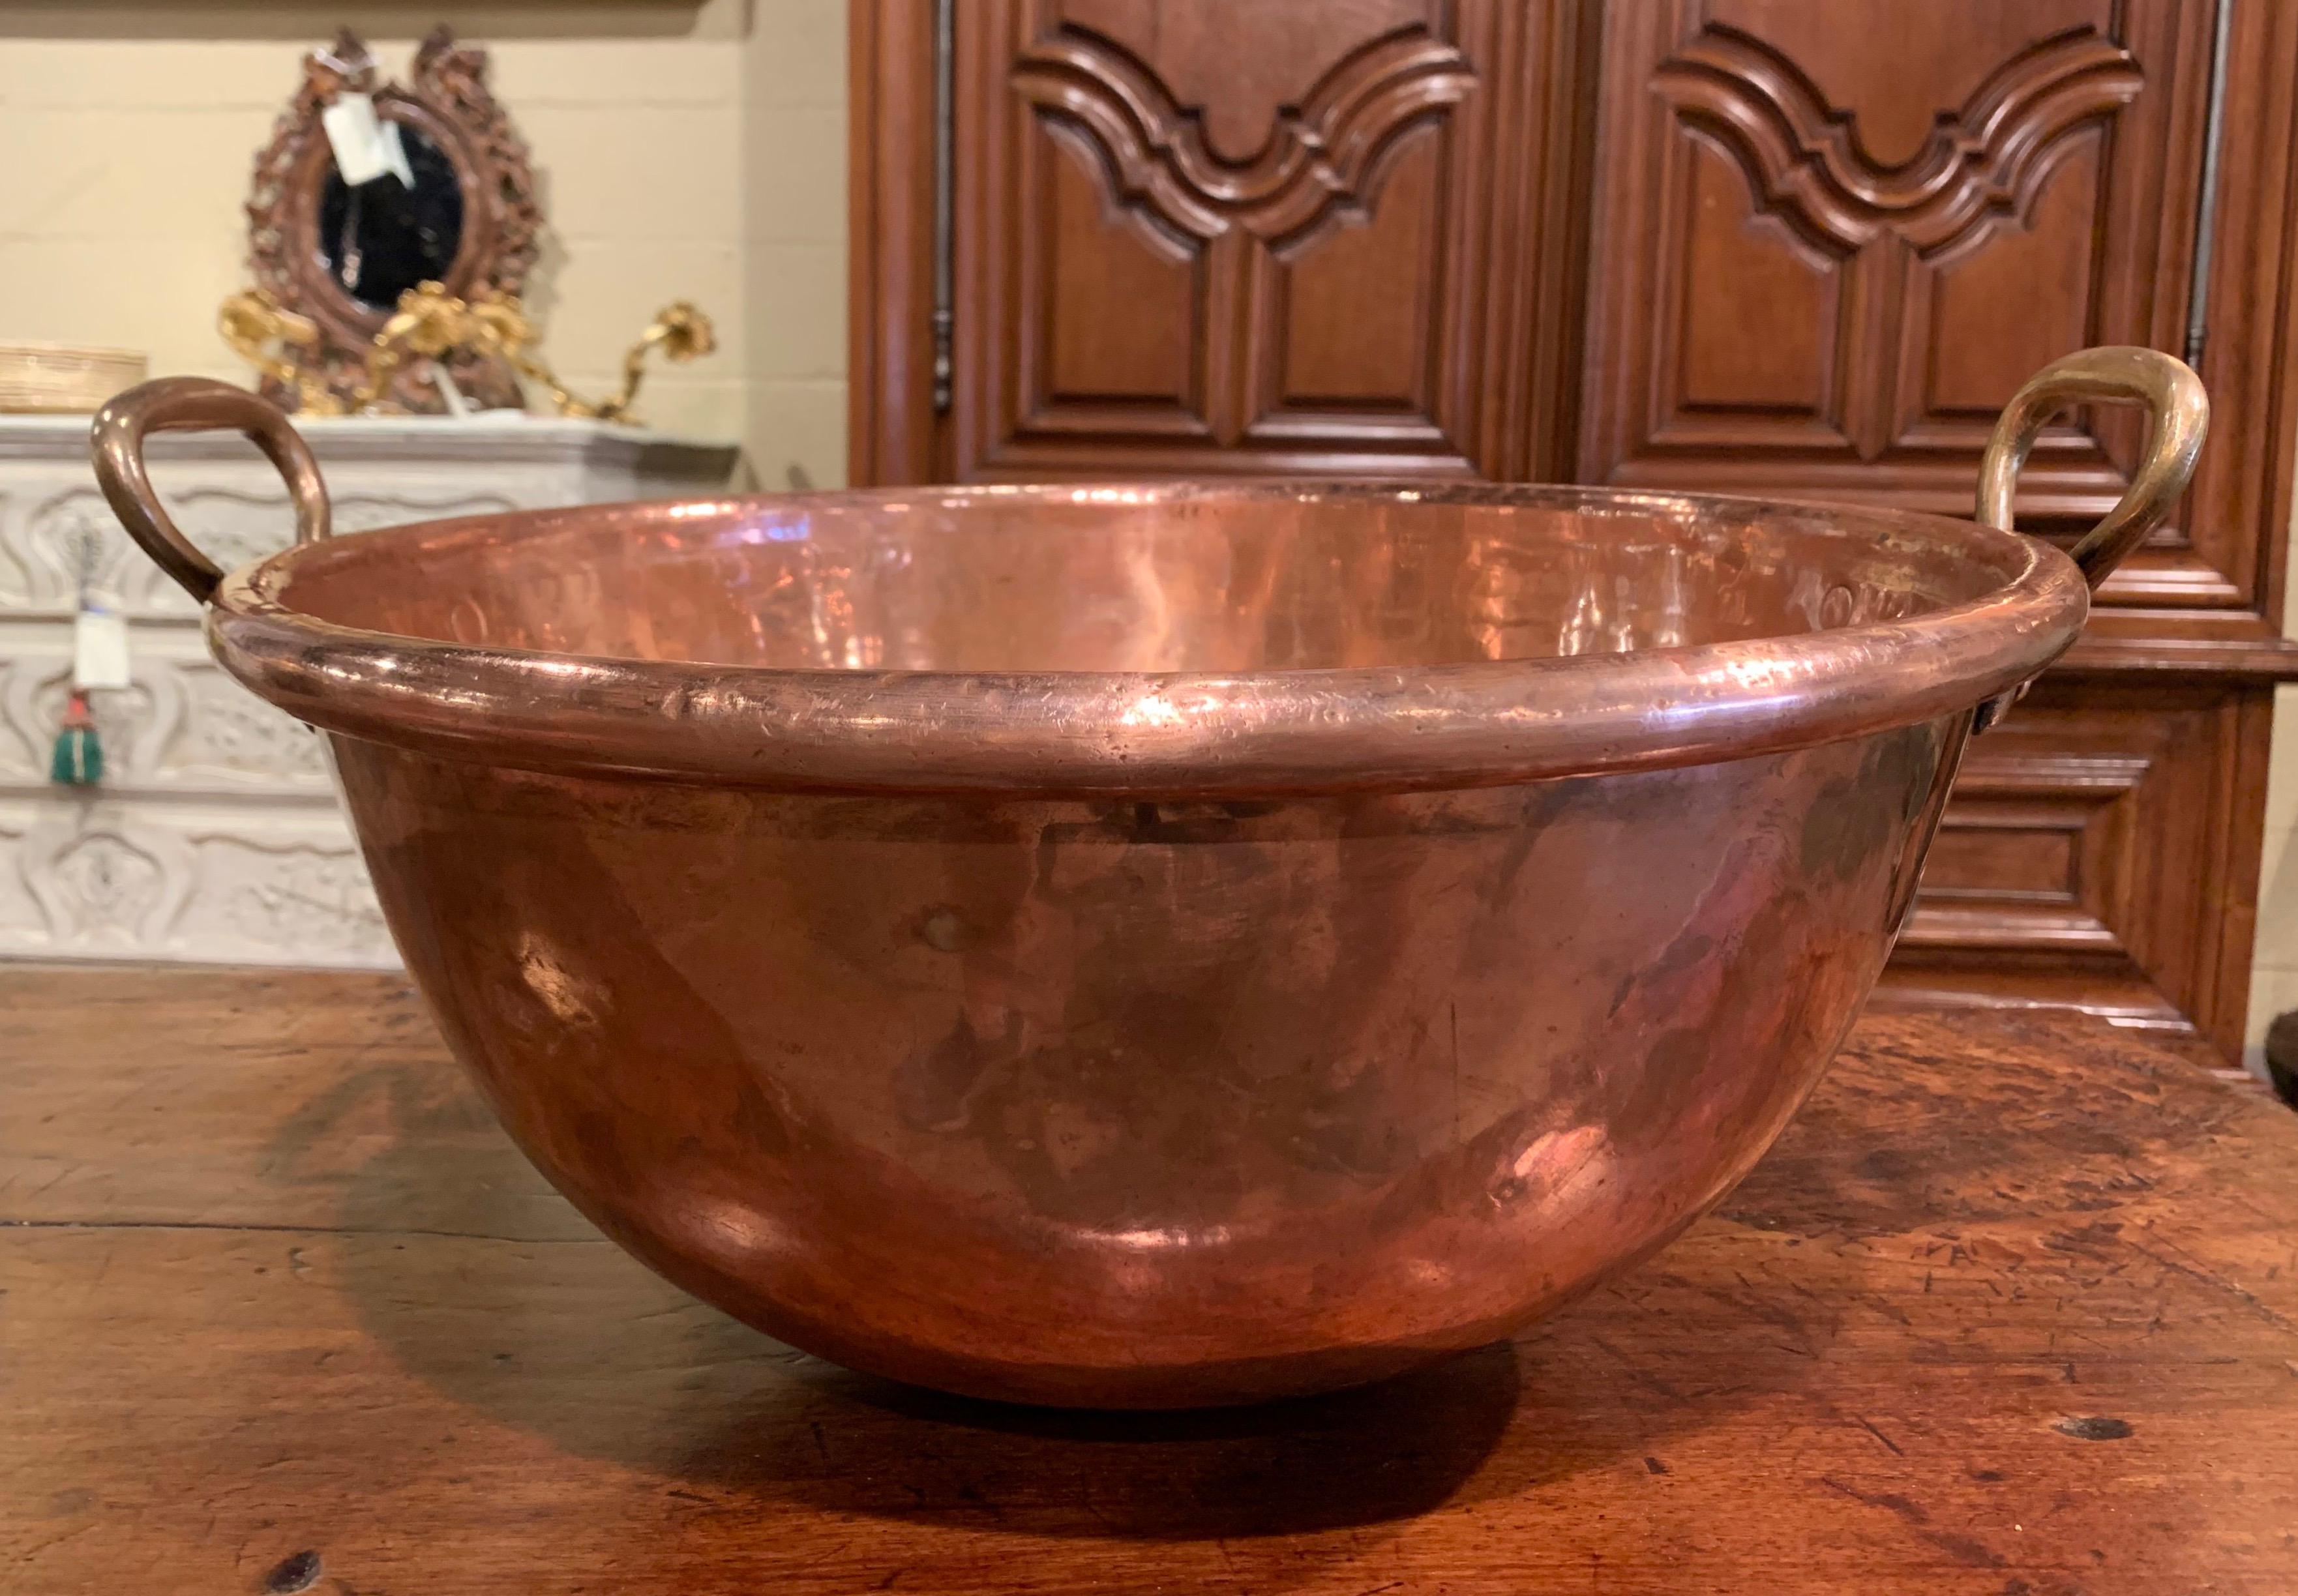 Keep your wine or beer chilled in style with this large elegant round bowl; crafted in Northern France circa 1870 and originally used for homemade jelly, the circular copper bowl is dressed with bronze side handles attached with rivets over a